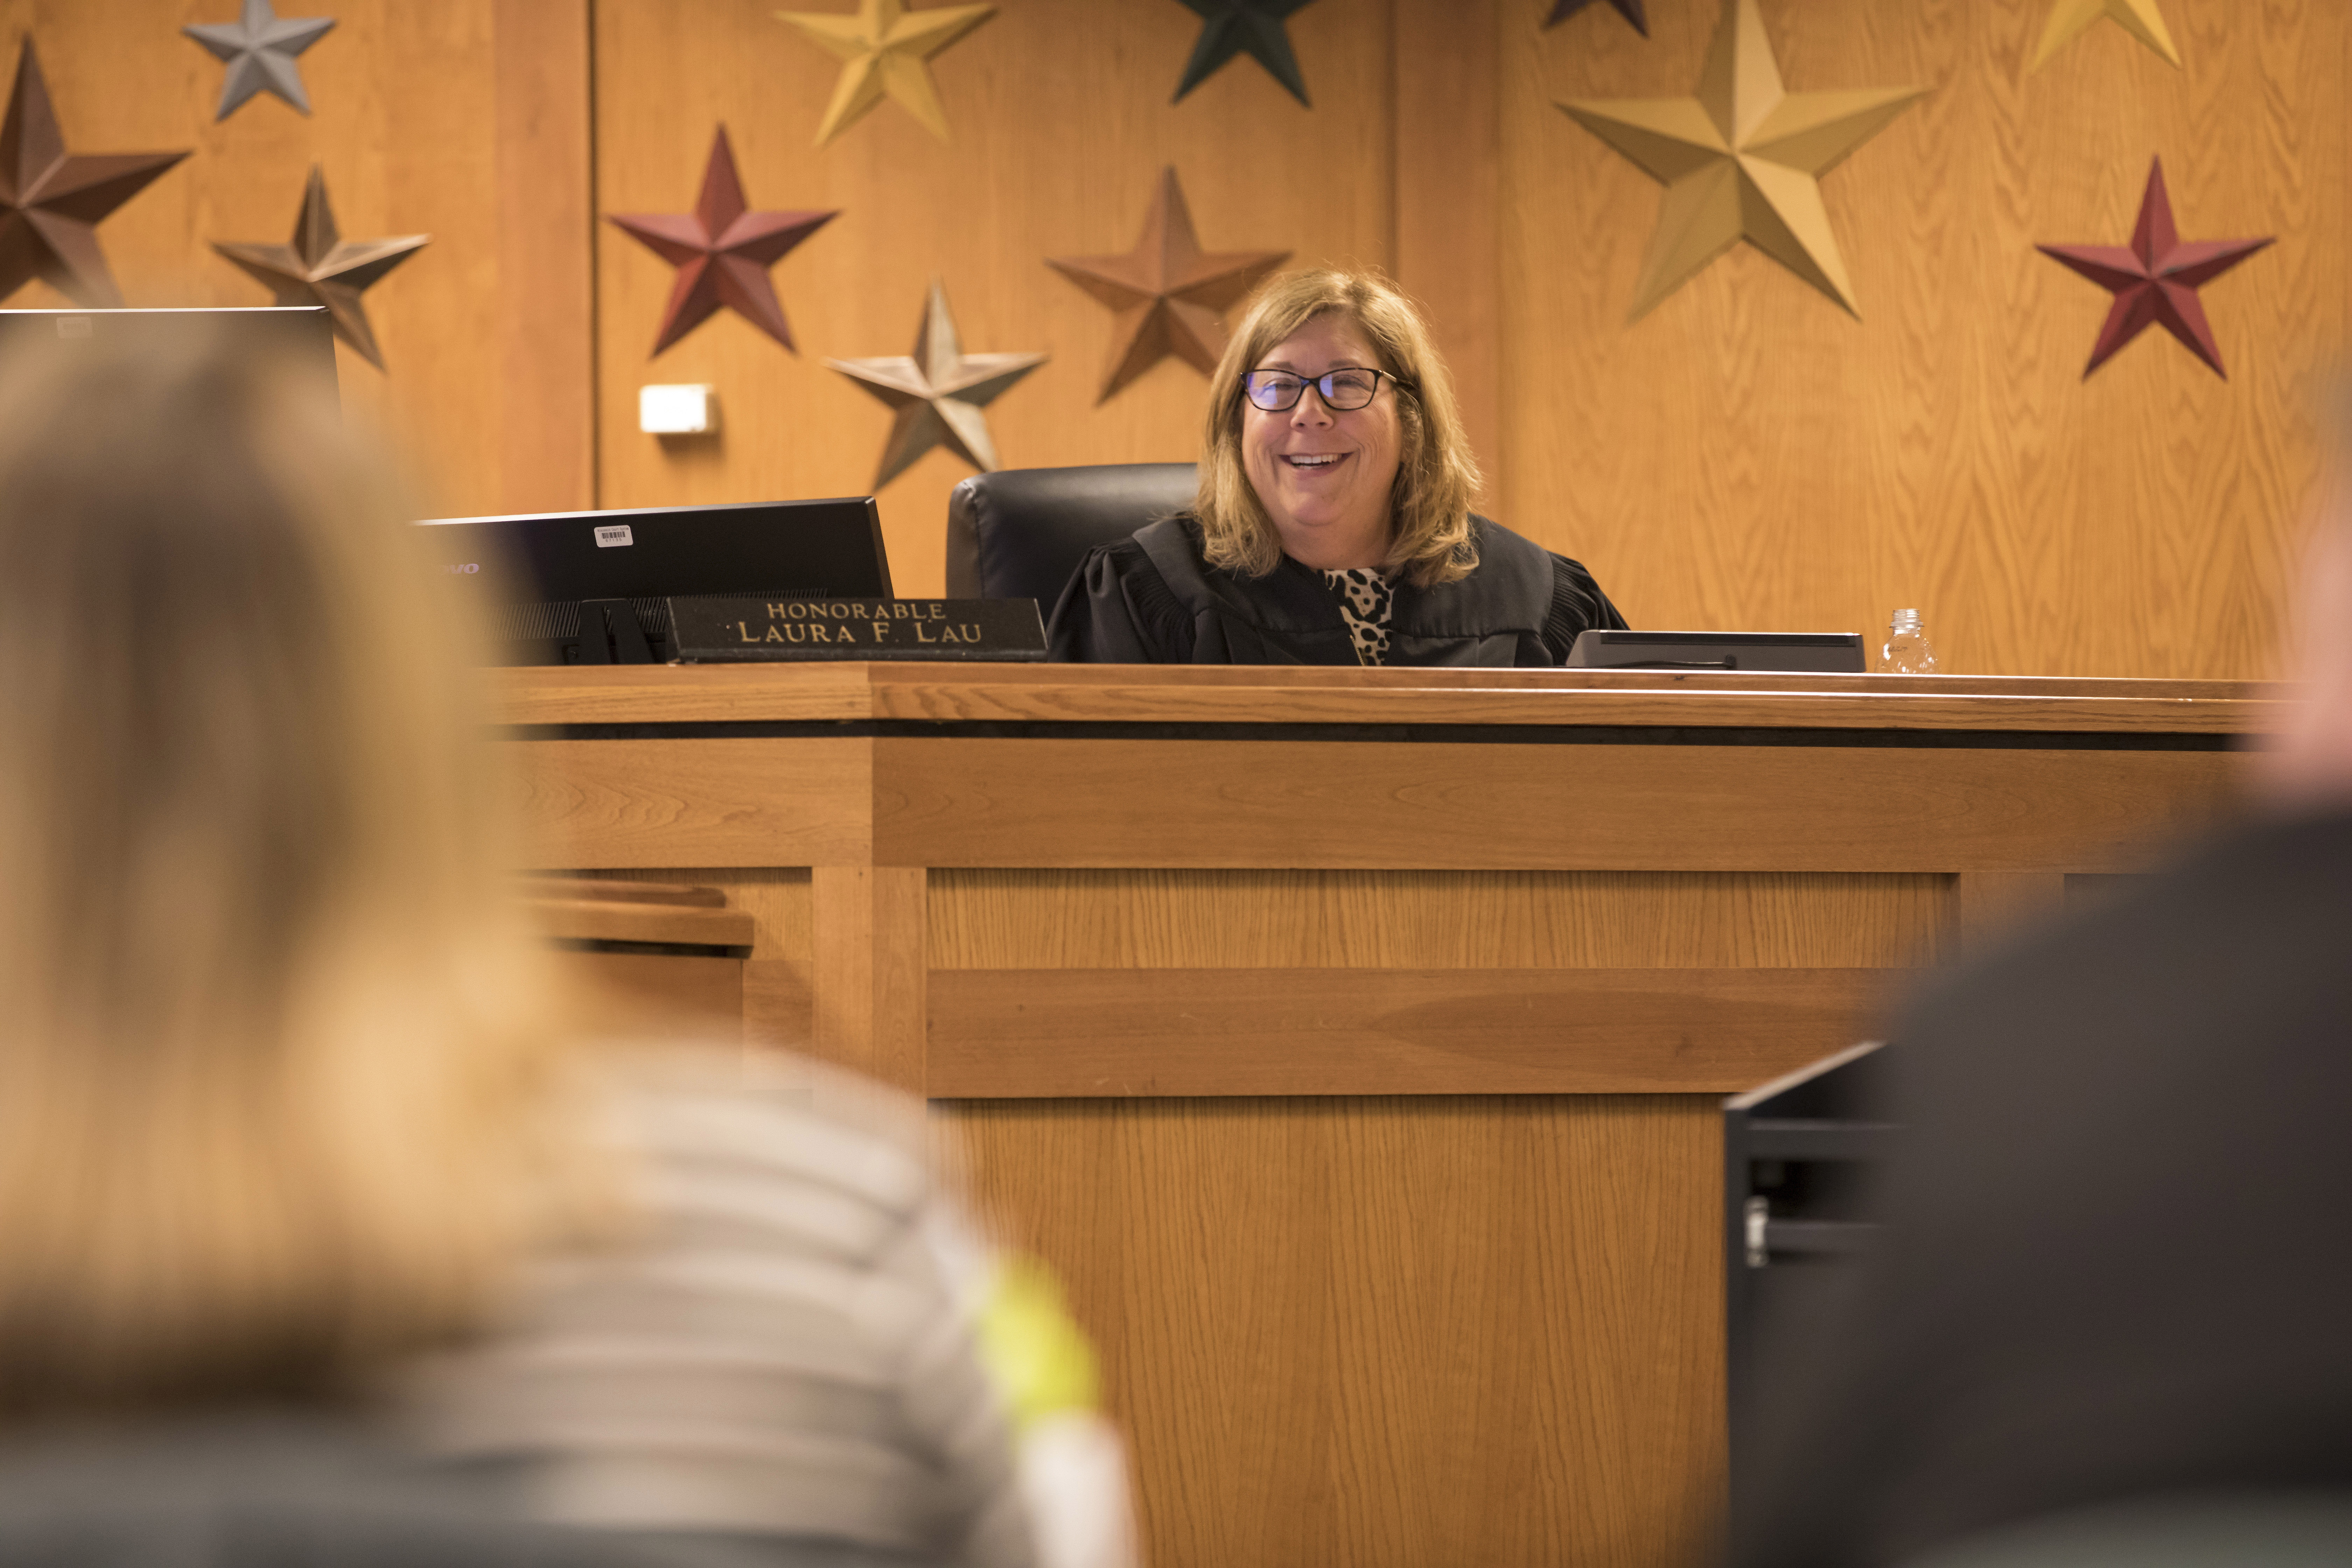 Waukesha County Judge Laura Lau smiles at a Waukesha County OWI Court participant during a hearing Thursday, April 11, 2019. The treatment court is meant as a way to keep drugged and drunken drivers accountable for their actions while also providing the rehabilitation necessary to make them safer, contributing members of society. Photo by Darin Dubinsky/WPR.